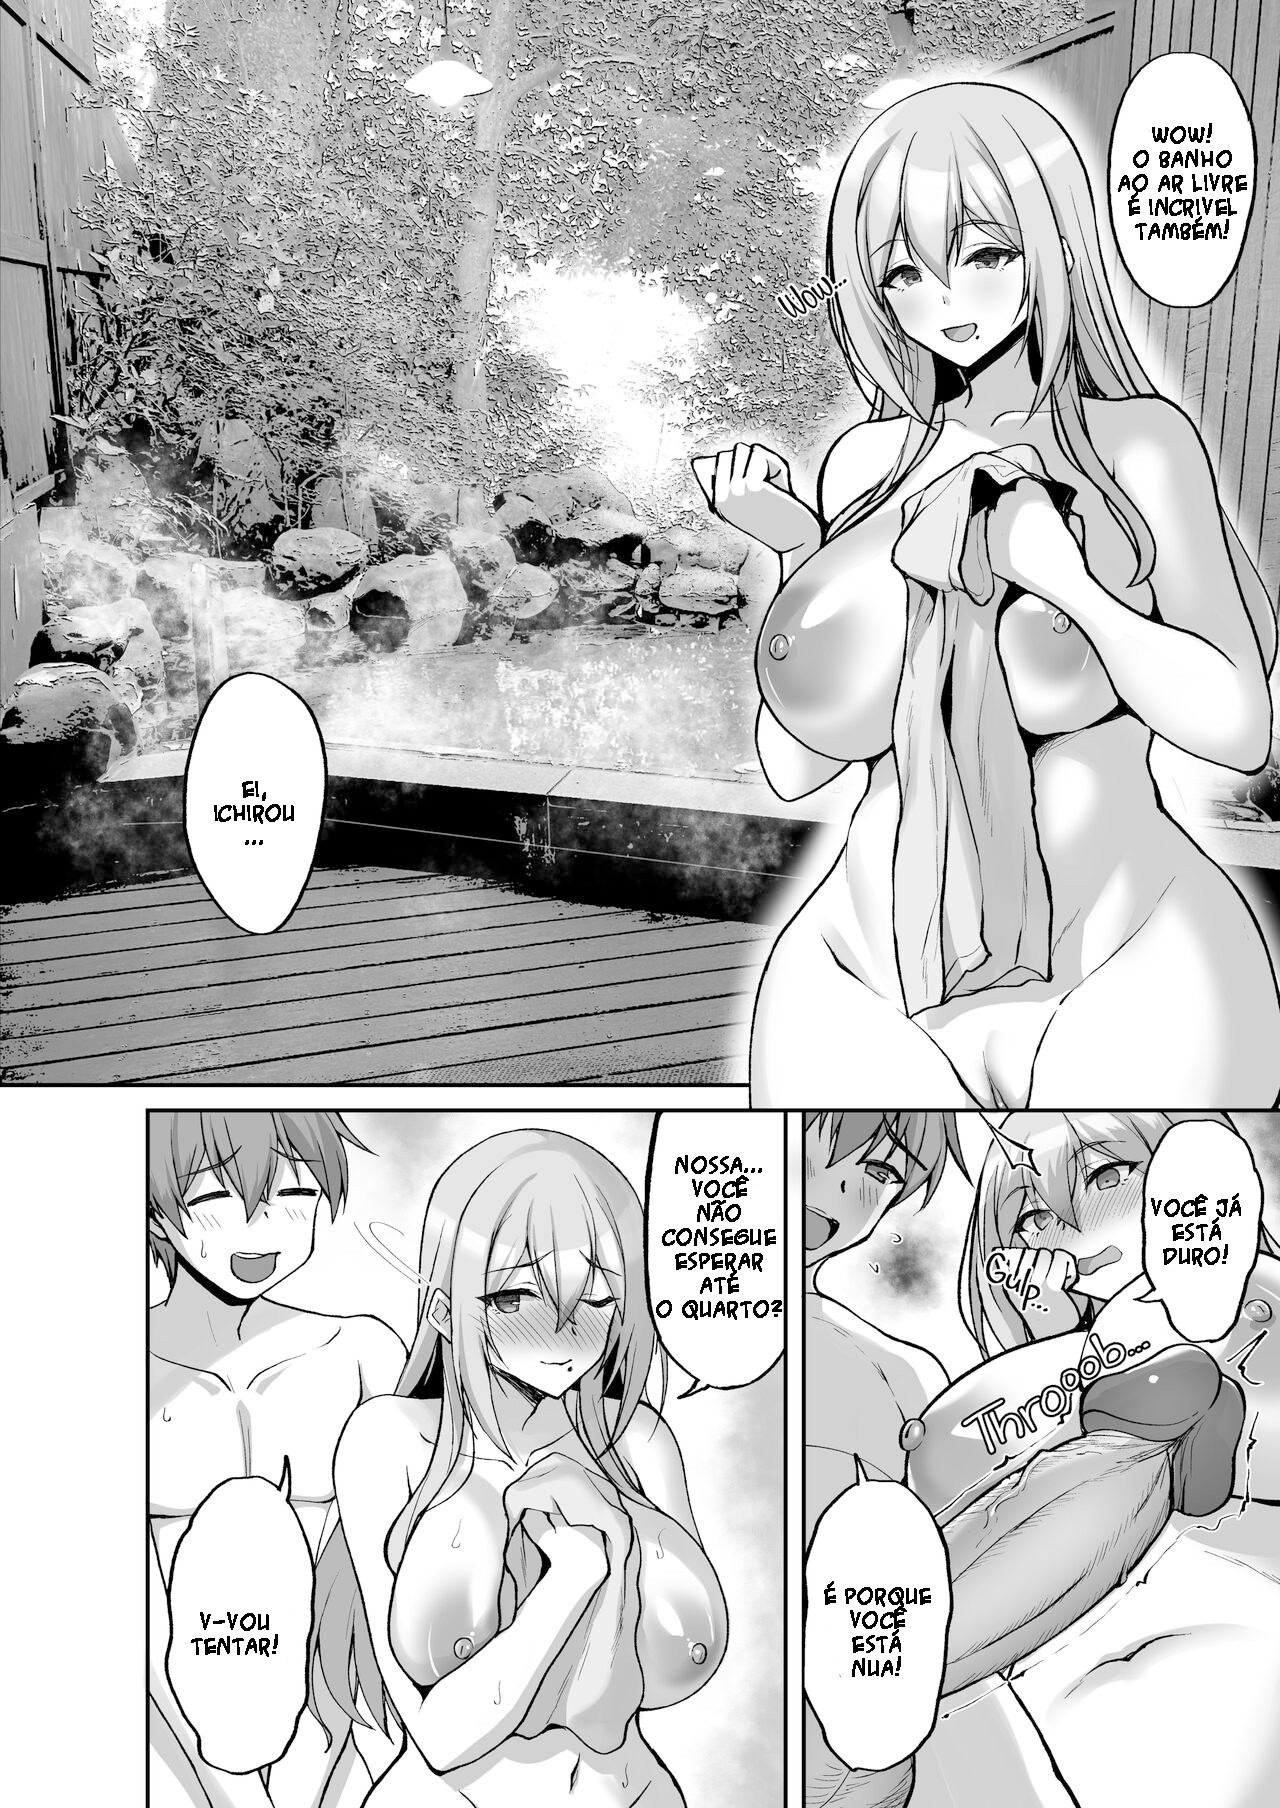 Do You Like Naughty Older Girls? Part 5: Steamy Hot Springs Trip With The Girl Next Door Hentai pt-br 09